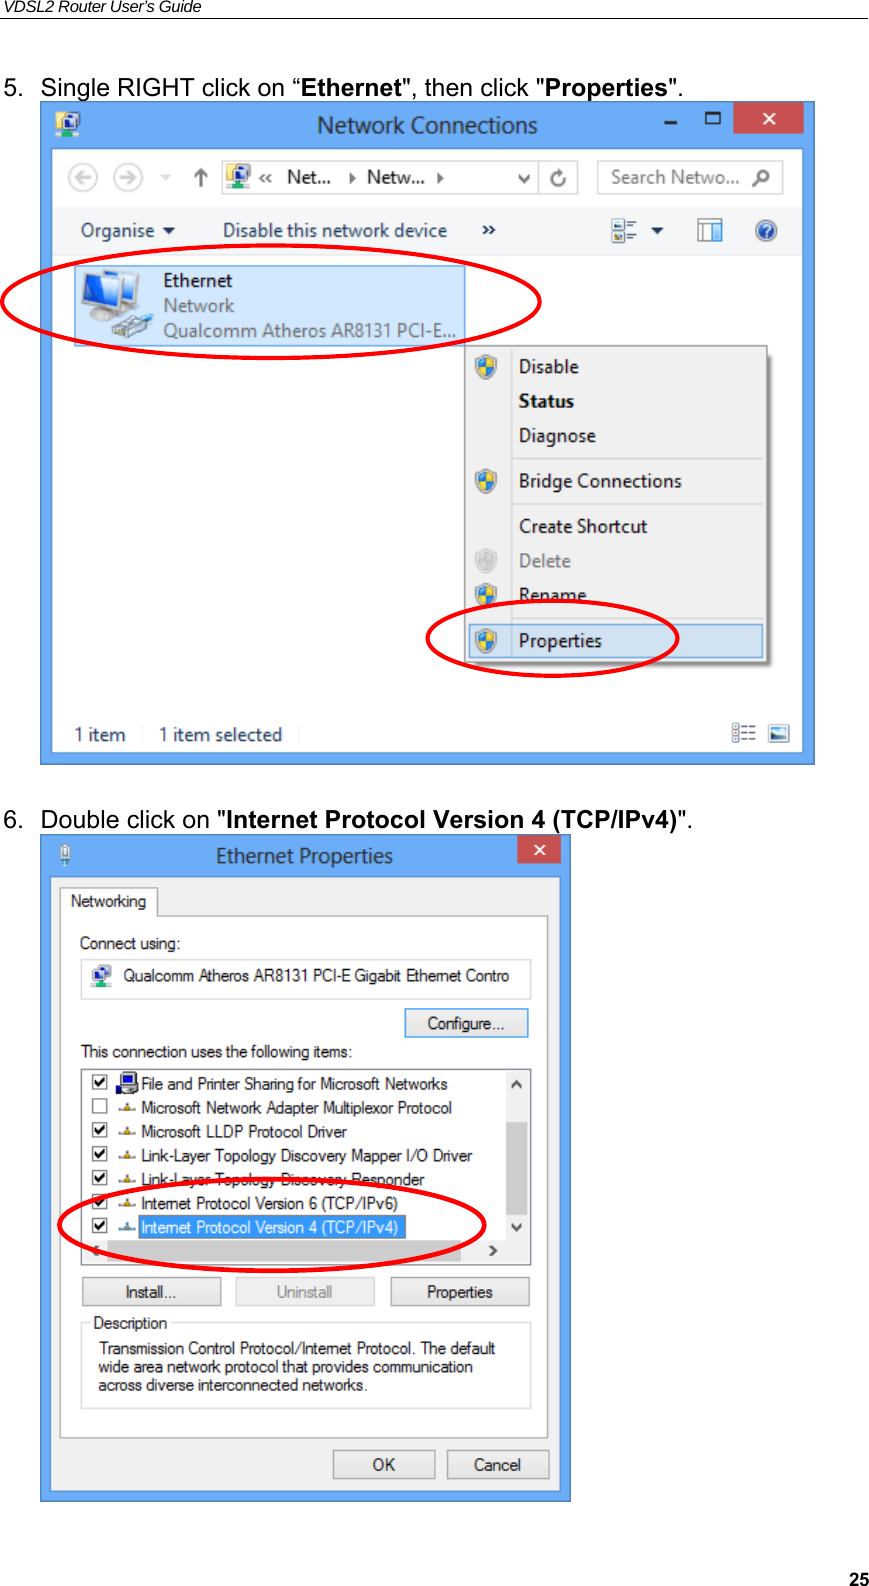 VDSL2 Router User’s Guide     255.  Single RIGHT click on “Ethernet&quot;, then click &quot;Properties&quot;.   6.  Double click on &quot;Internet Protocol Version 4 (TCP/IPv4)&quot;.  